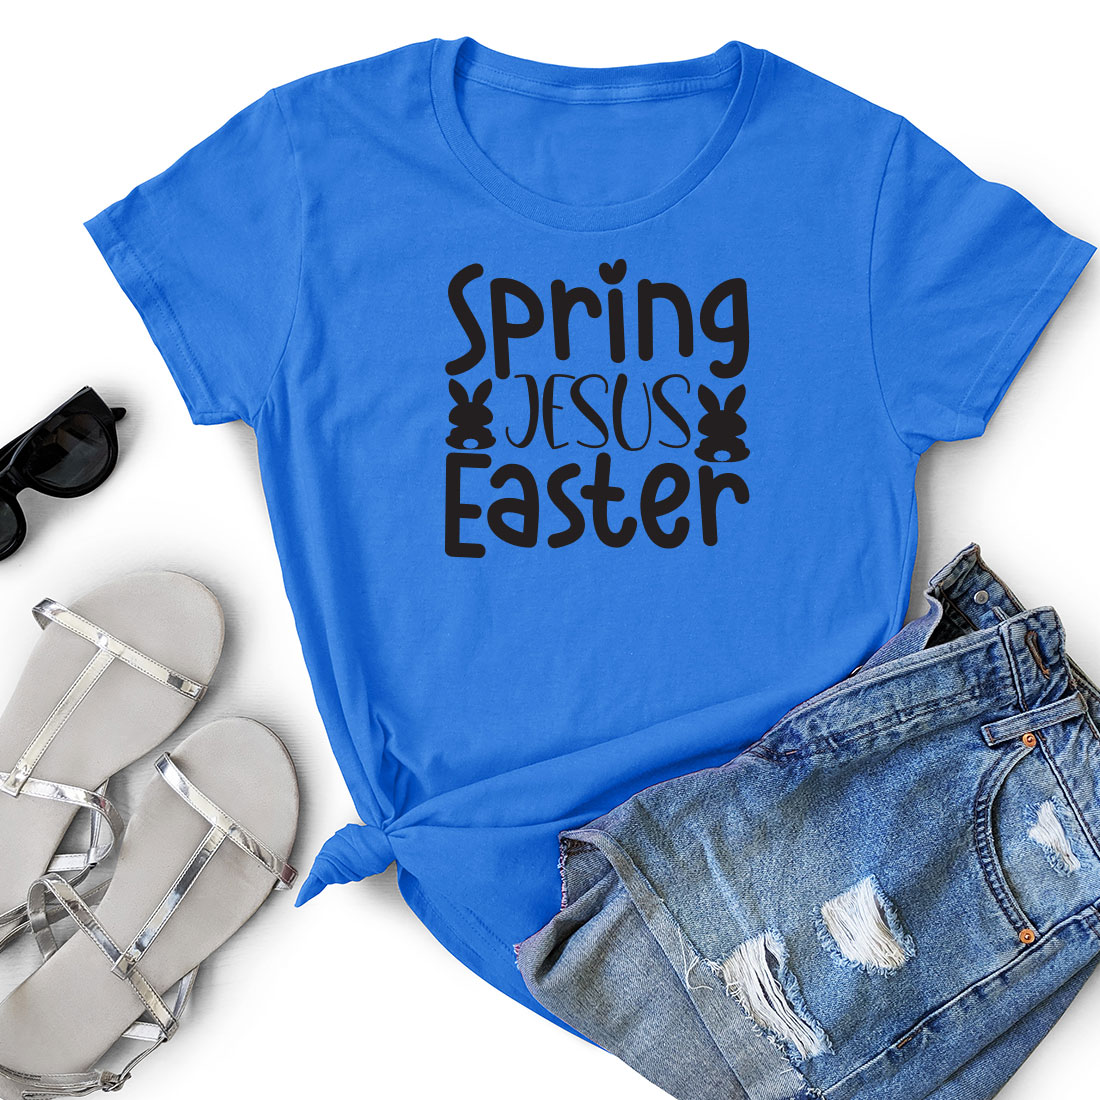 Blue shirt that says spring jesus easter.